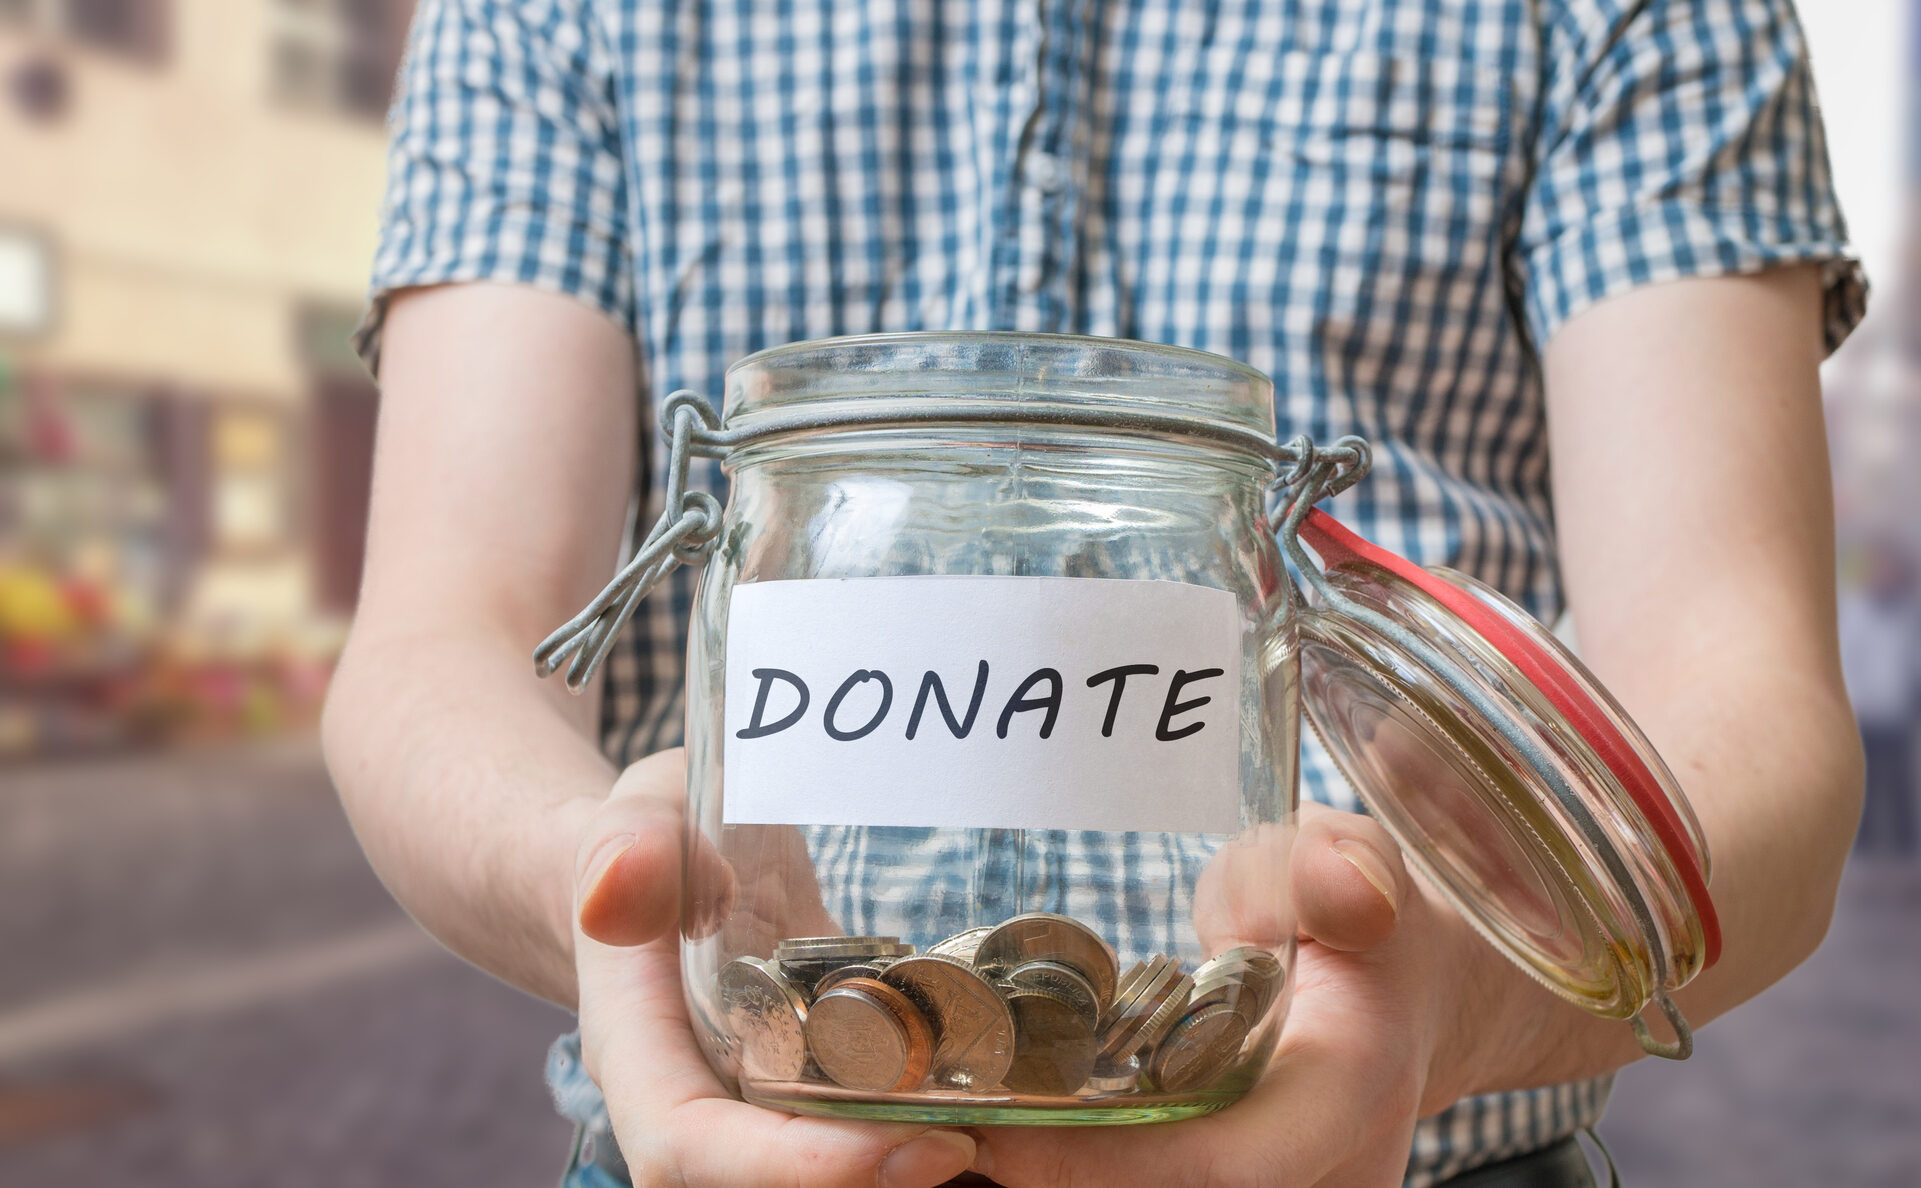 the photo shows the torso of a person who is holding a glass jar containing coins and has the word DONATE displayed on a white sticker